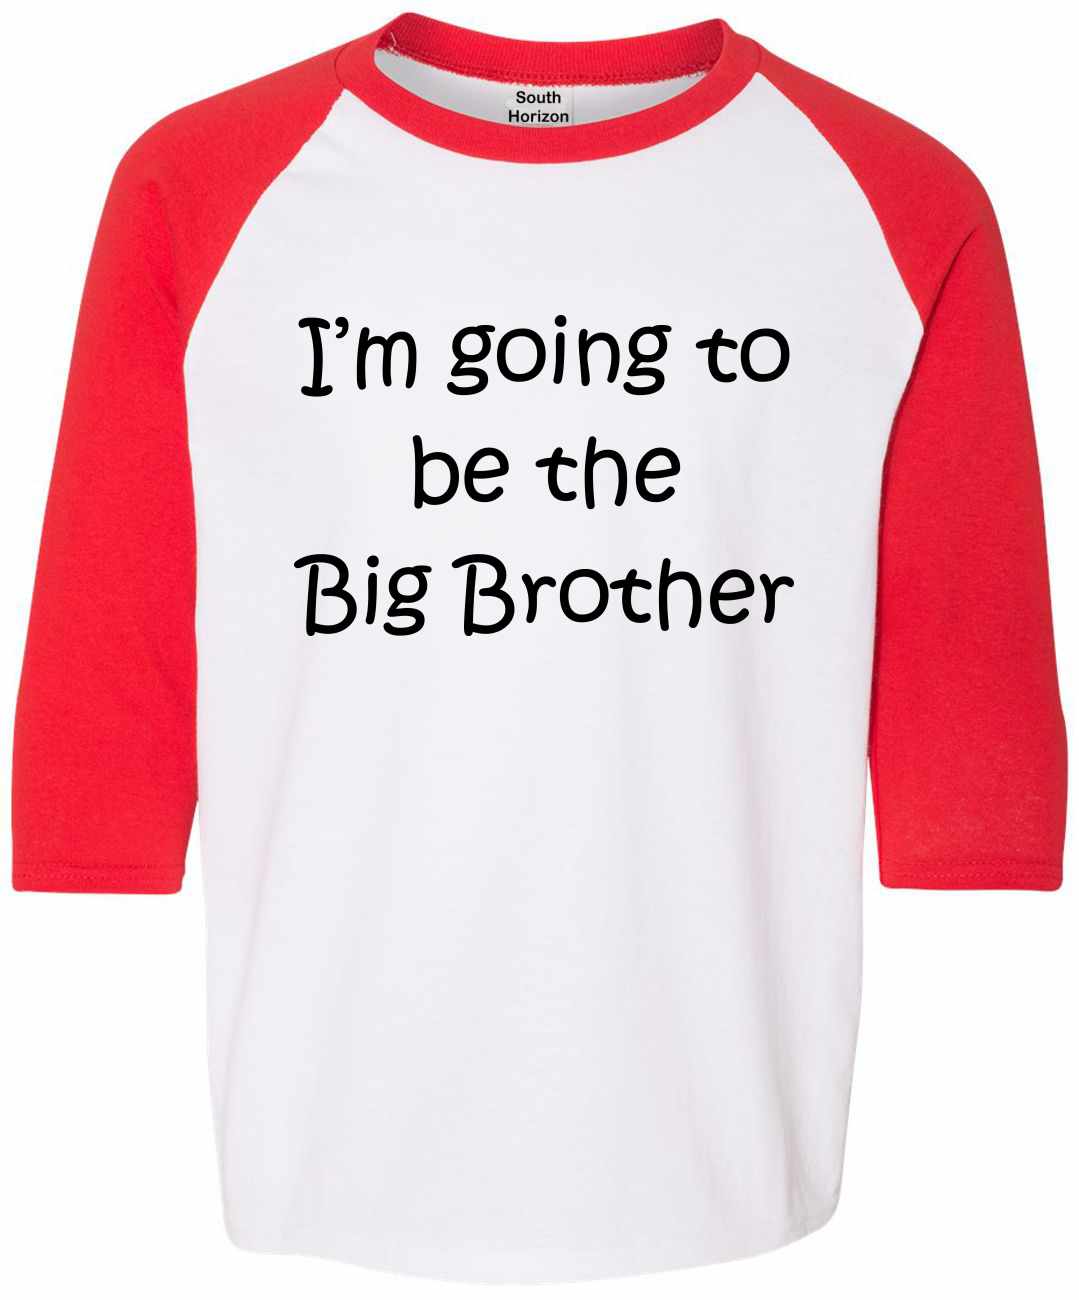 I'M GOING TO BE THE BIG BROTHER on Youth Baseball Shirt (#518-212)